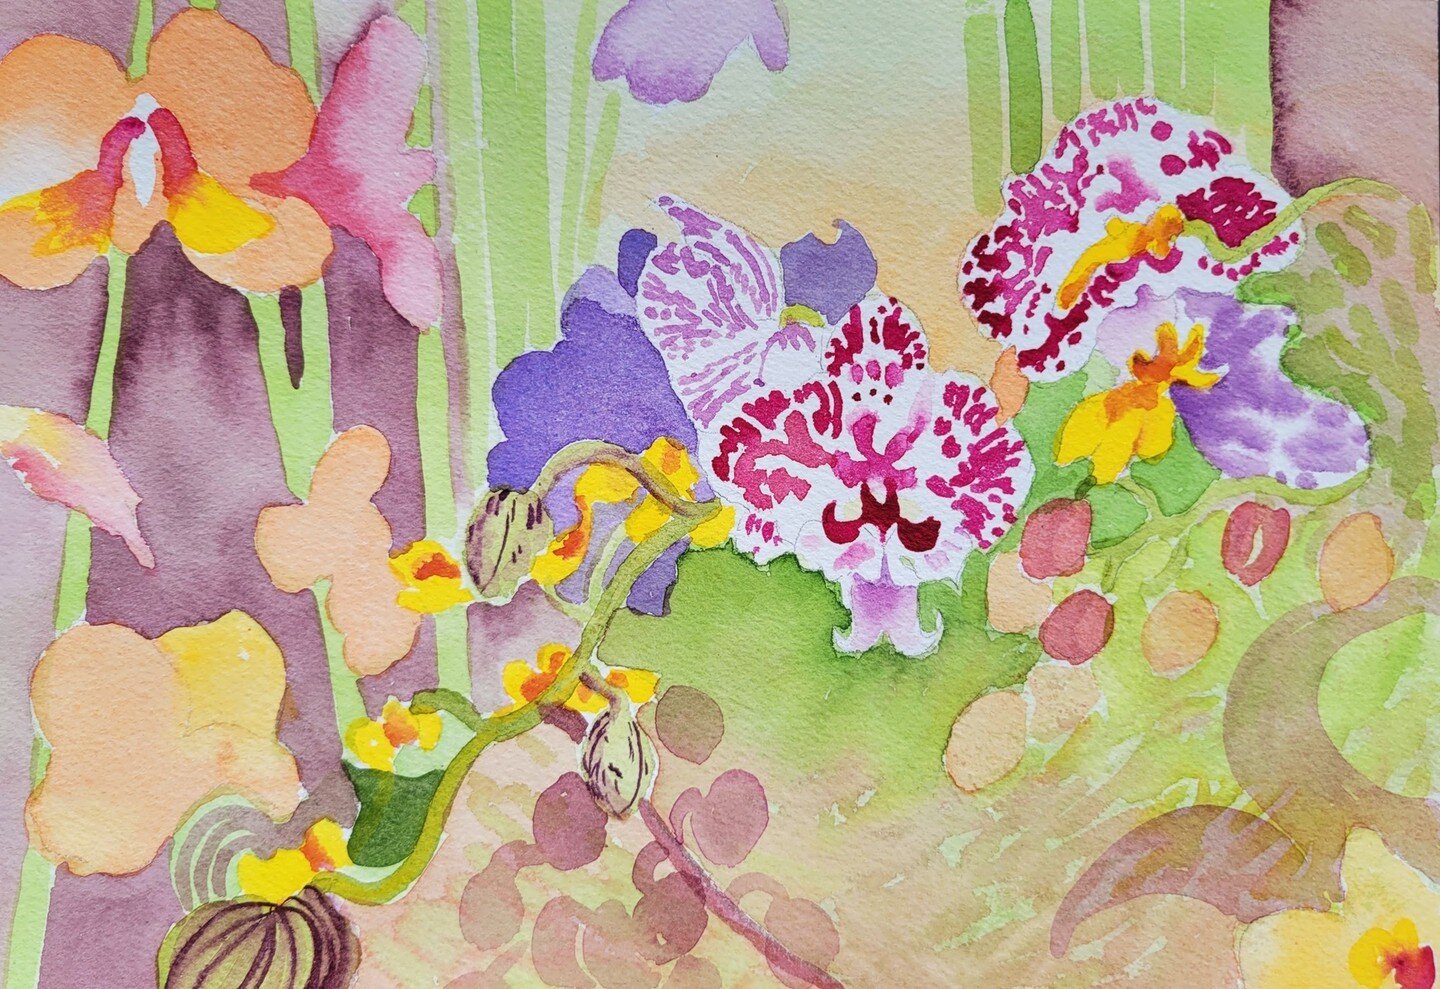 Join me for Painting and Drawing! Visit Chicago Botanic Garden website to see gouache, watercolor and colored pencil classes I'm teaching, starting May 17.